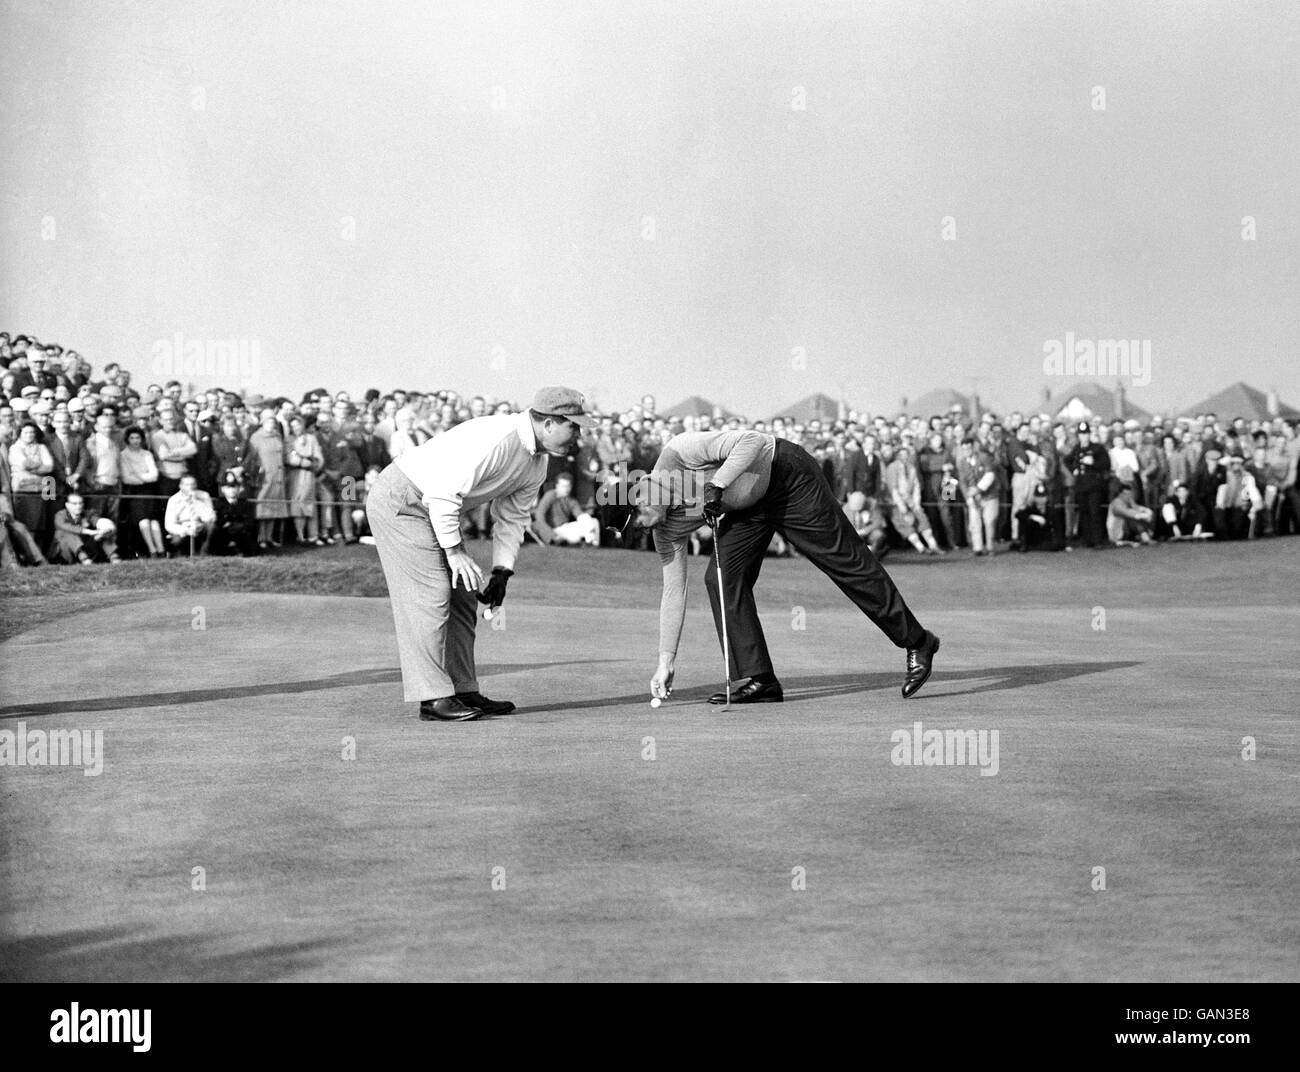 Golf - Ryder Cup - Great Britain and Ireland v USA - Royal Lytham and St Annes. Mike Souchak and his partner Bill Collins of the USA discussing a putt. Stock Photo